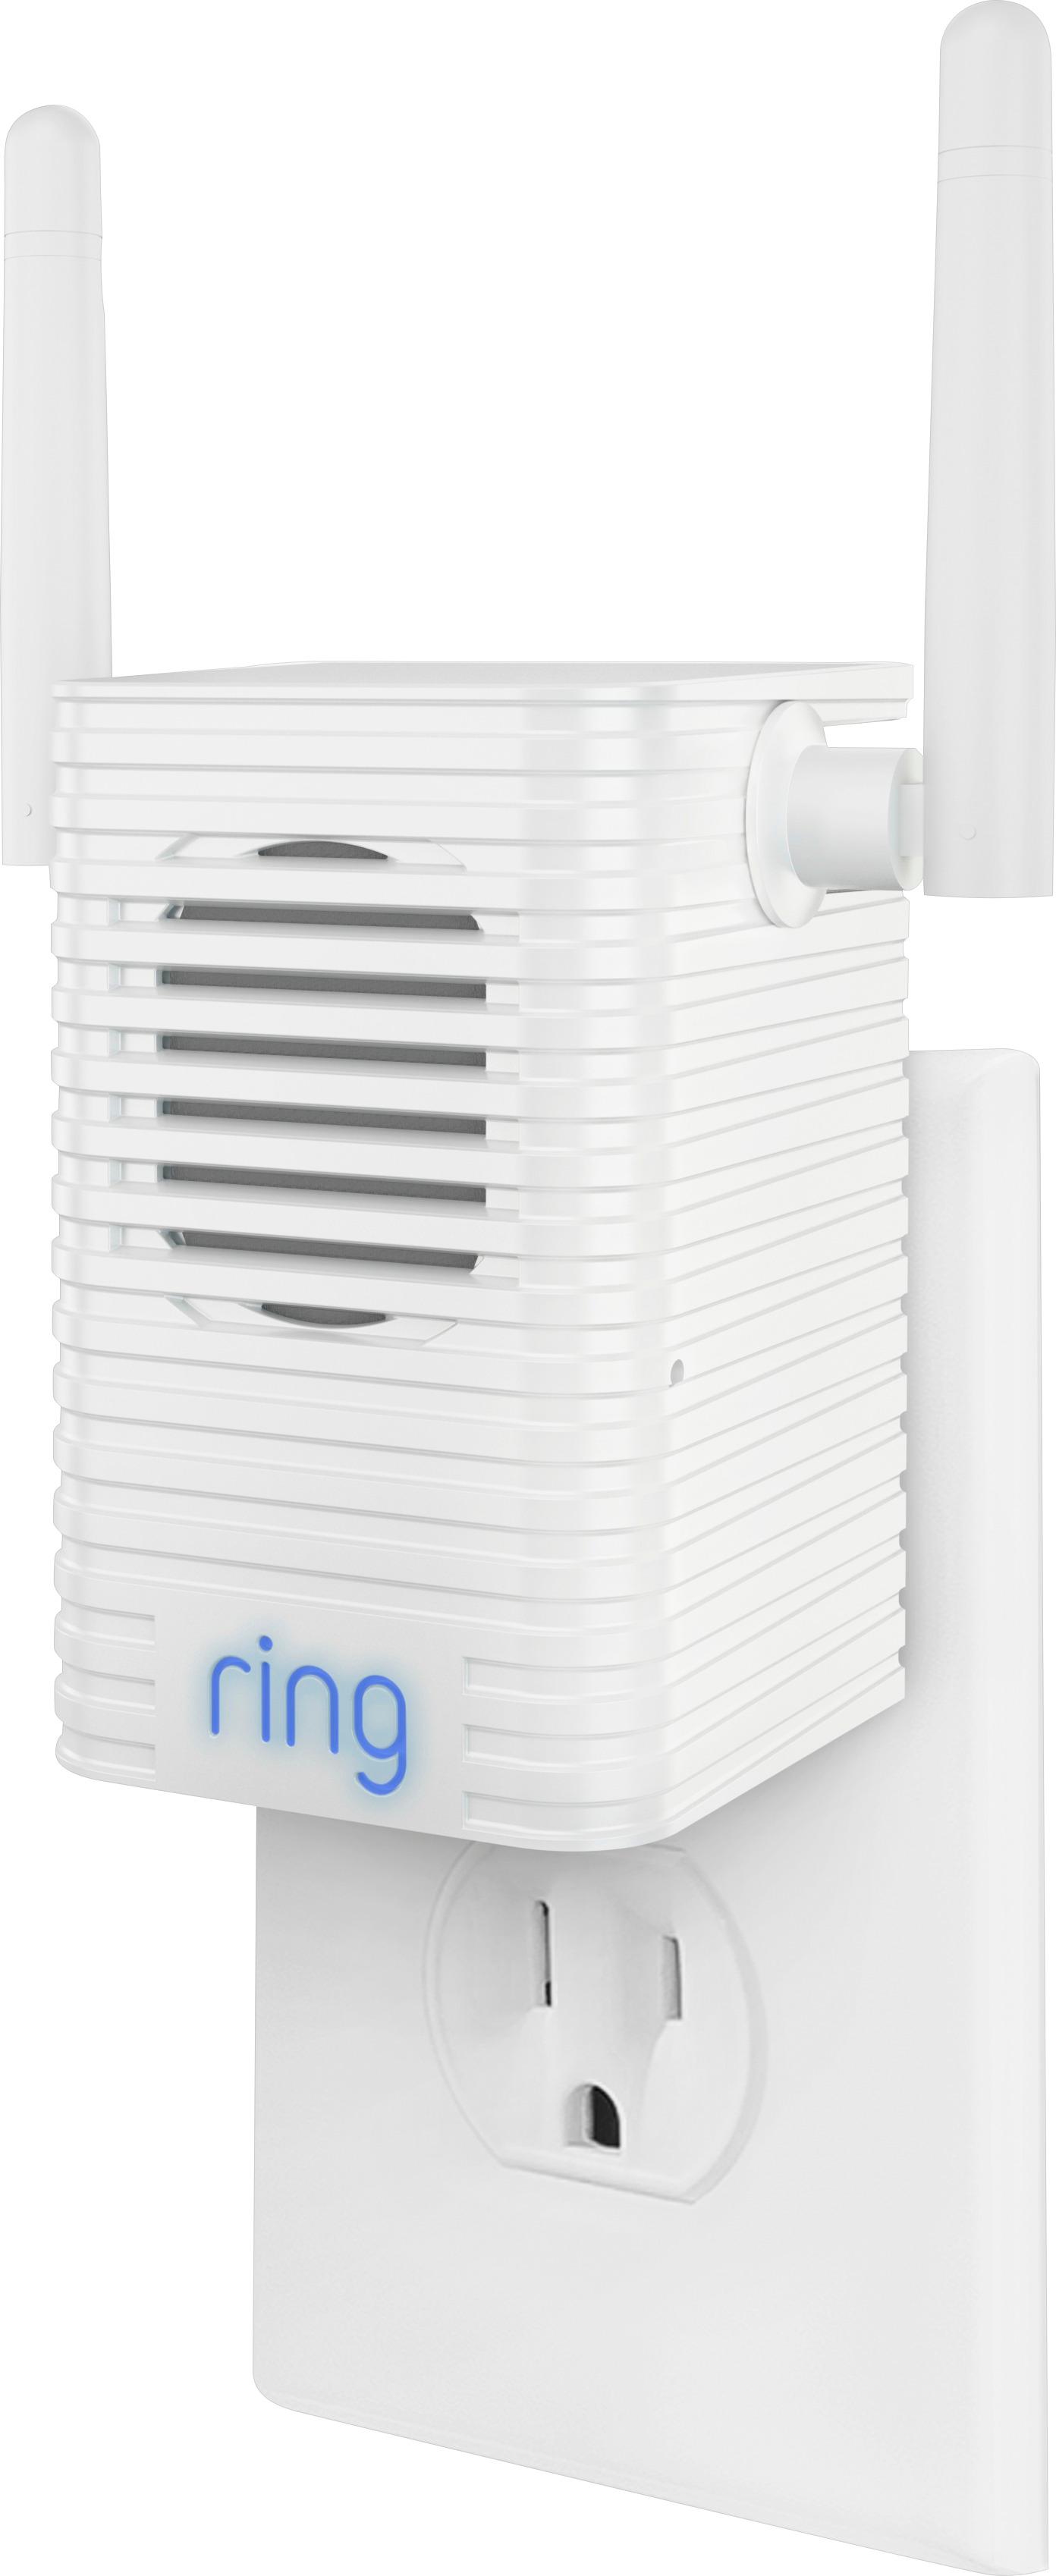 Best Buy Chime Pro WiFi Extender and Indoor Chime for Ring Devices